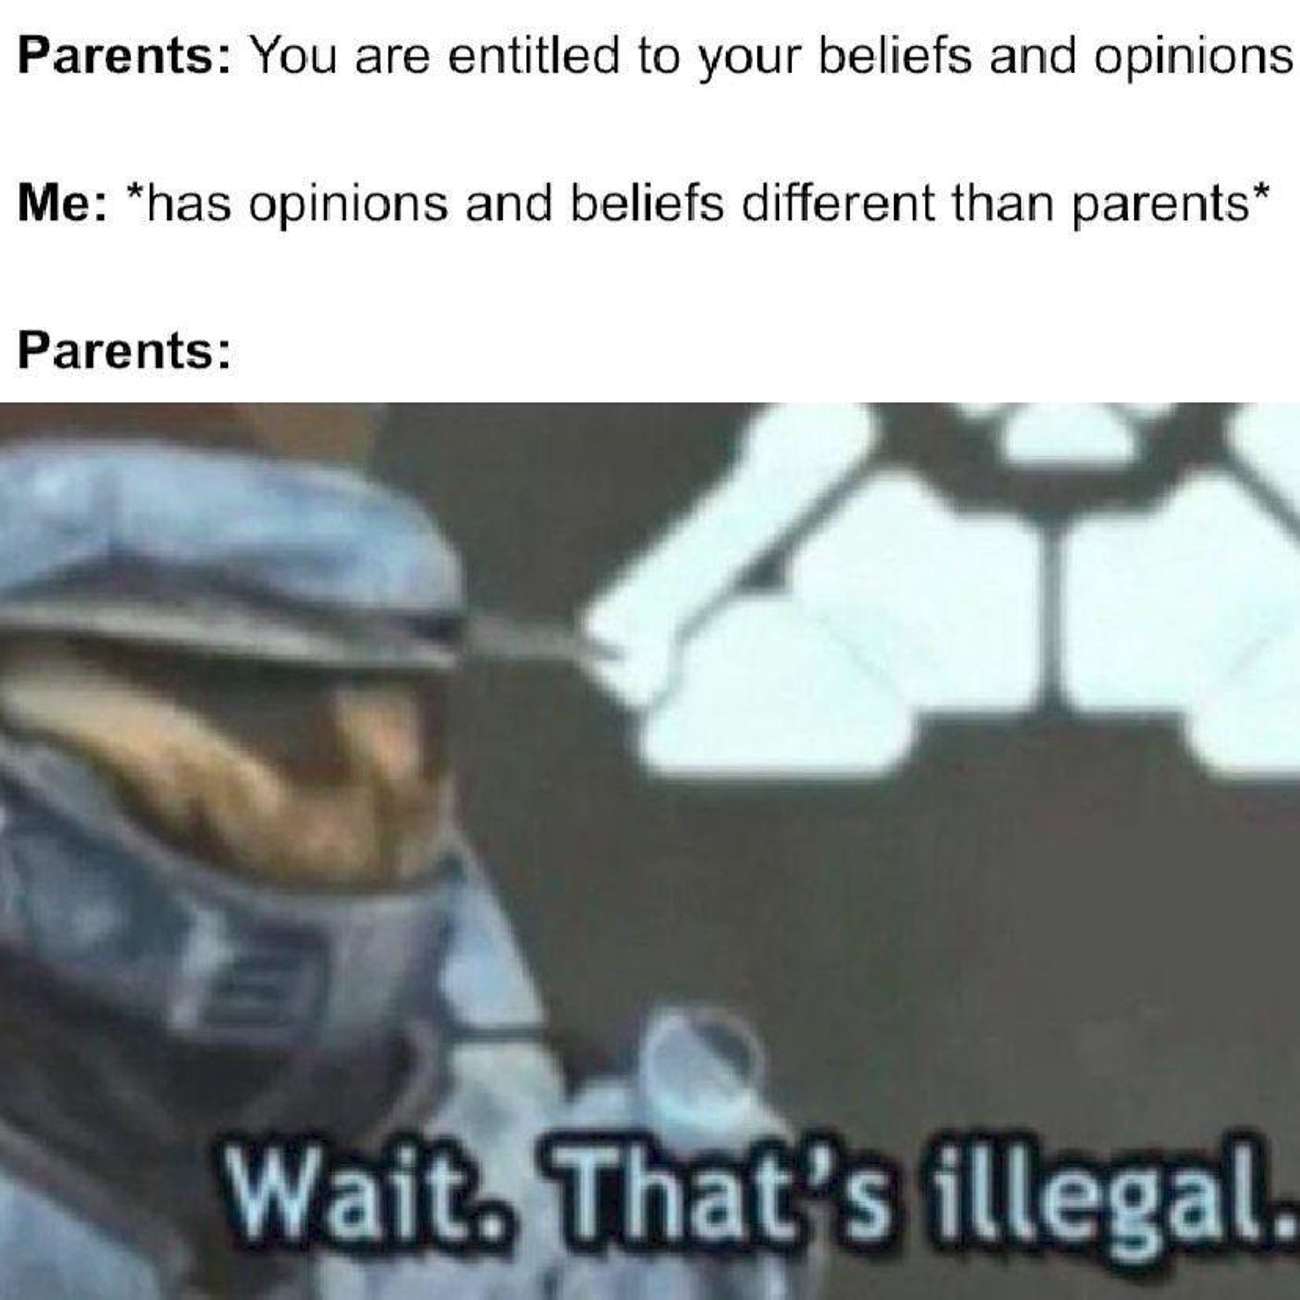 wait that's illegal meme - Parents You are entitled to your beliefs and opinions Me has opinions and beliefs different than parents Parents Wait. That's illegal.